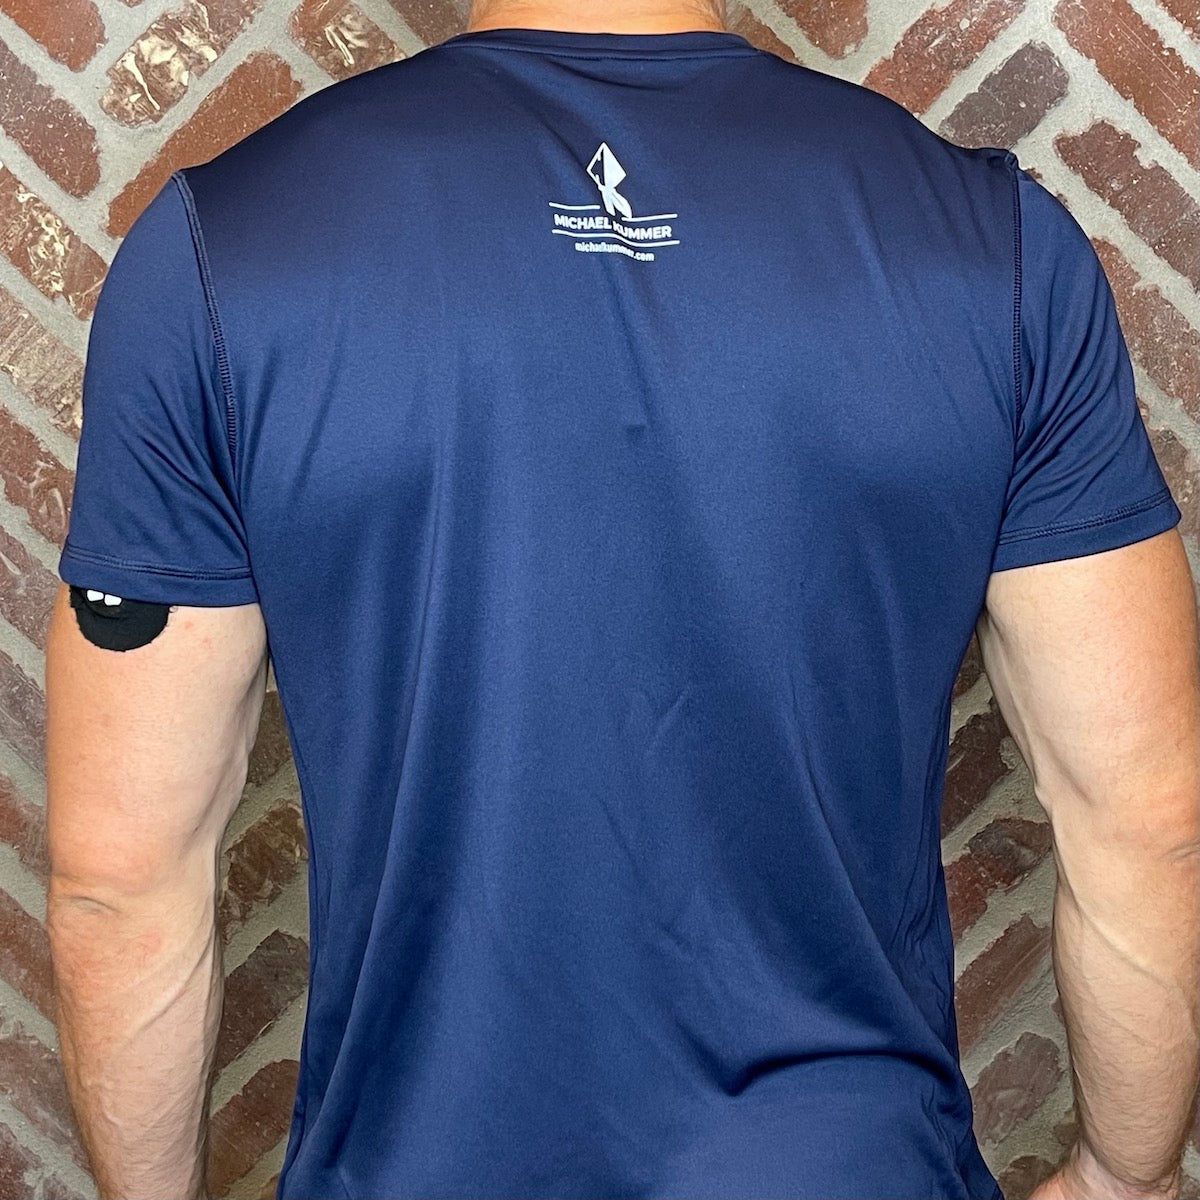 MK Supplements NO EXCUSES T-Shirt in Navy, back.